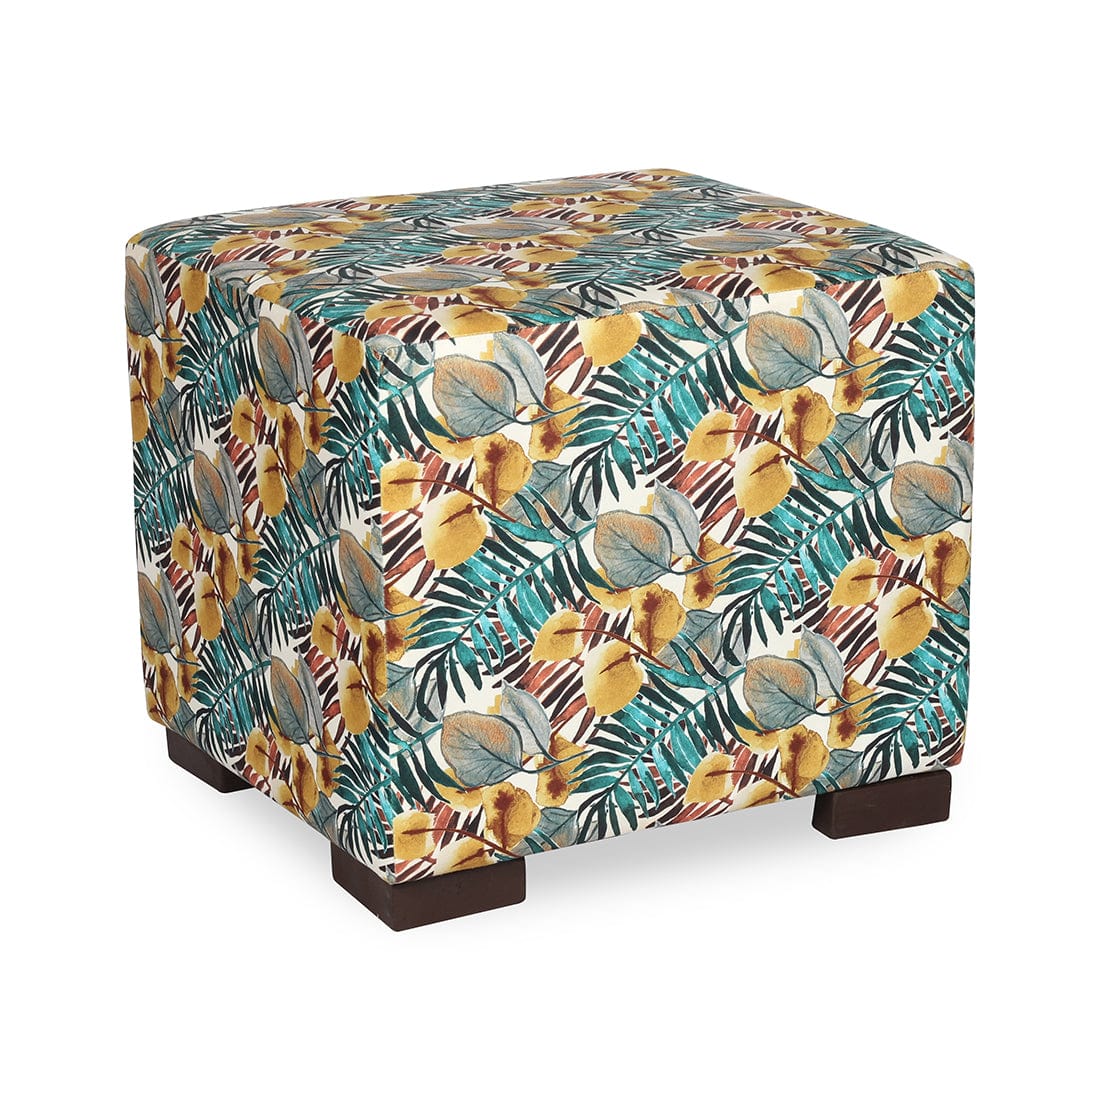 DOE BUCK SQUARE PRINTED OTTOMAN WITH WOODEN LEG